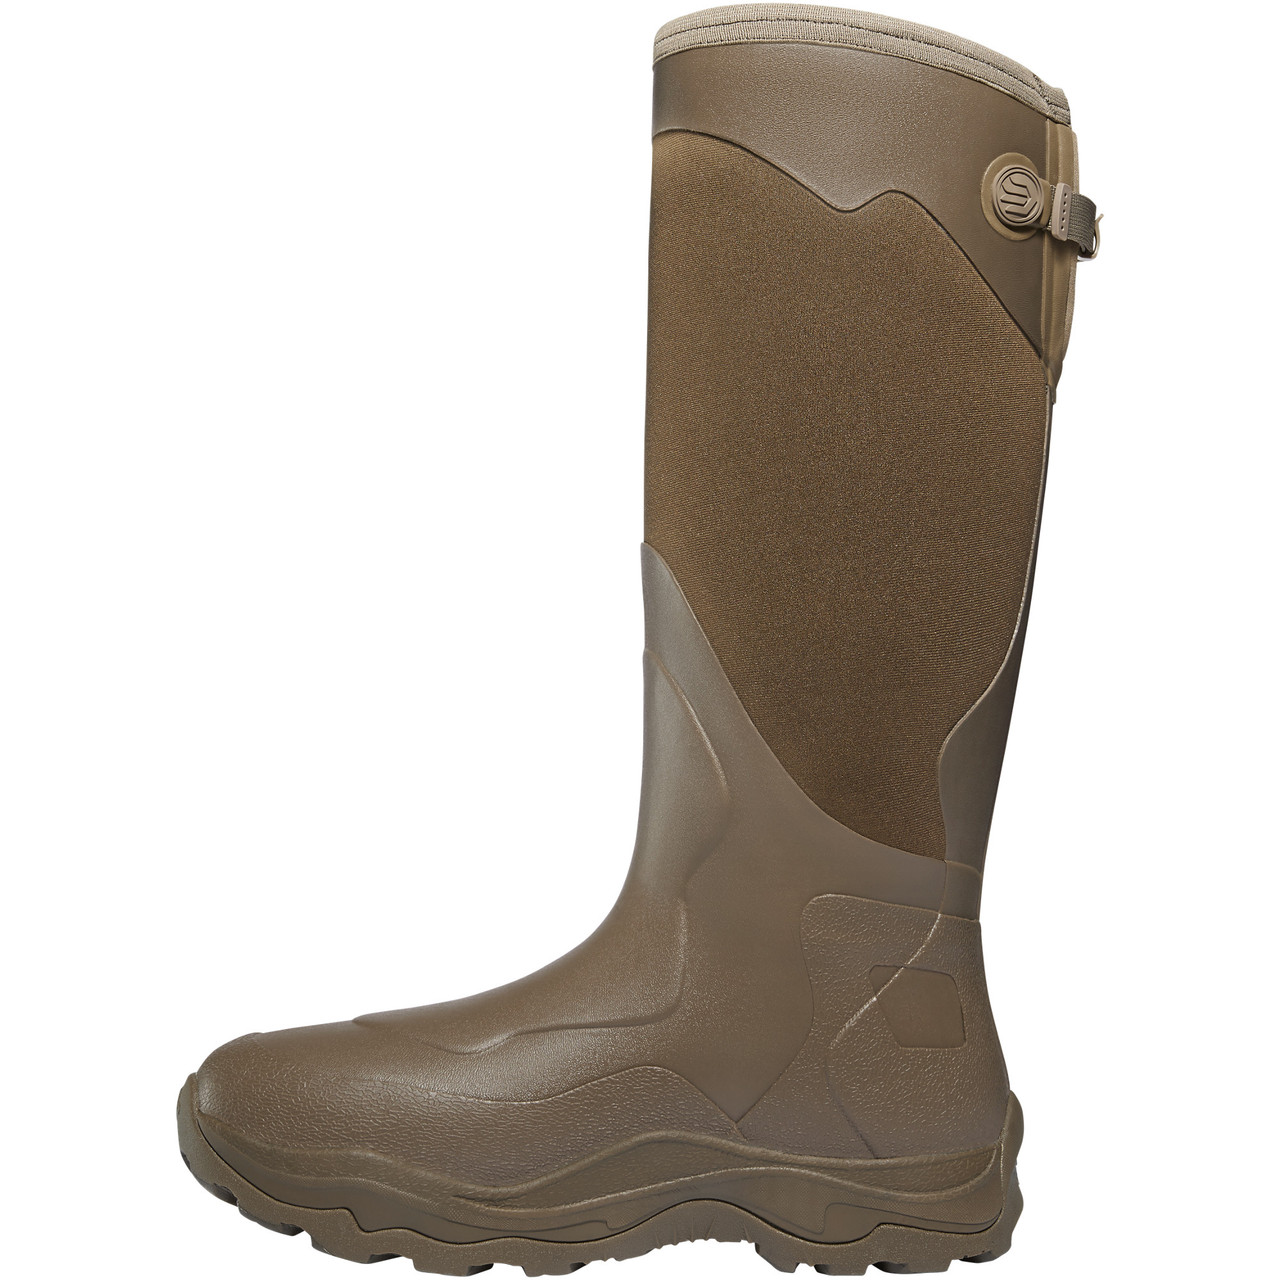 LACROSSE ALPHA AGILITY SNAKE BOOT 17" BROWN HUNT BOOTS 302420